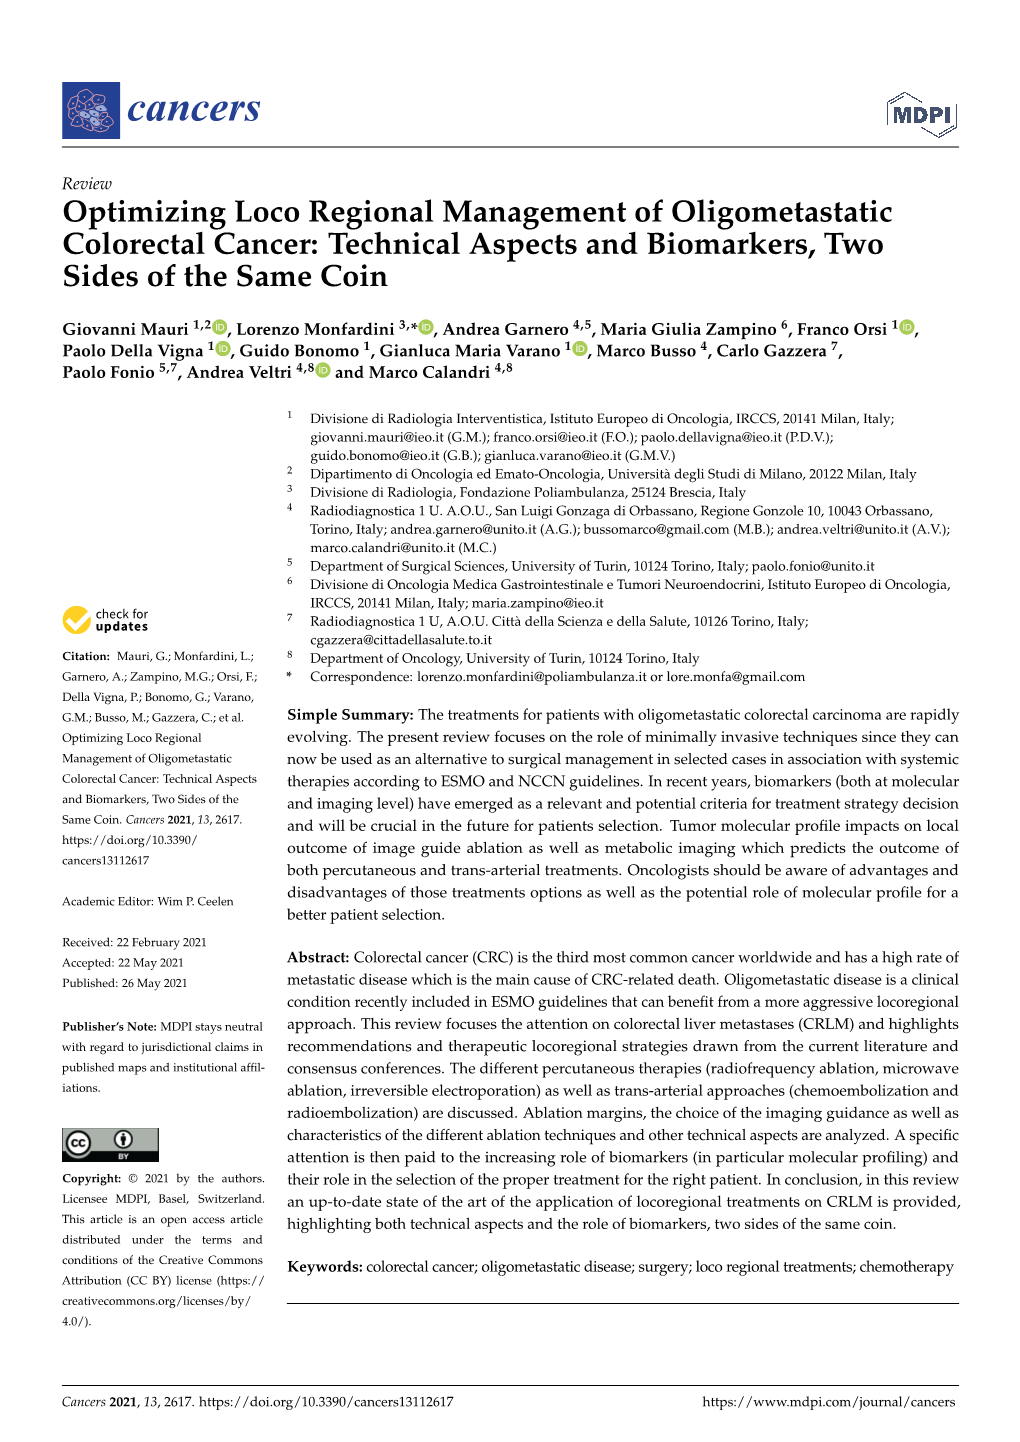 Optimizing Loco Regional Management of Oligometastatic Colorectal Cancer: Technical Aspects and Biomarkers, Two Sides of the Same Coin